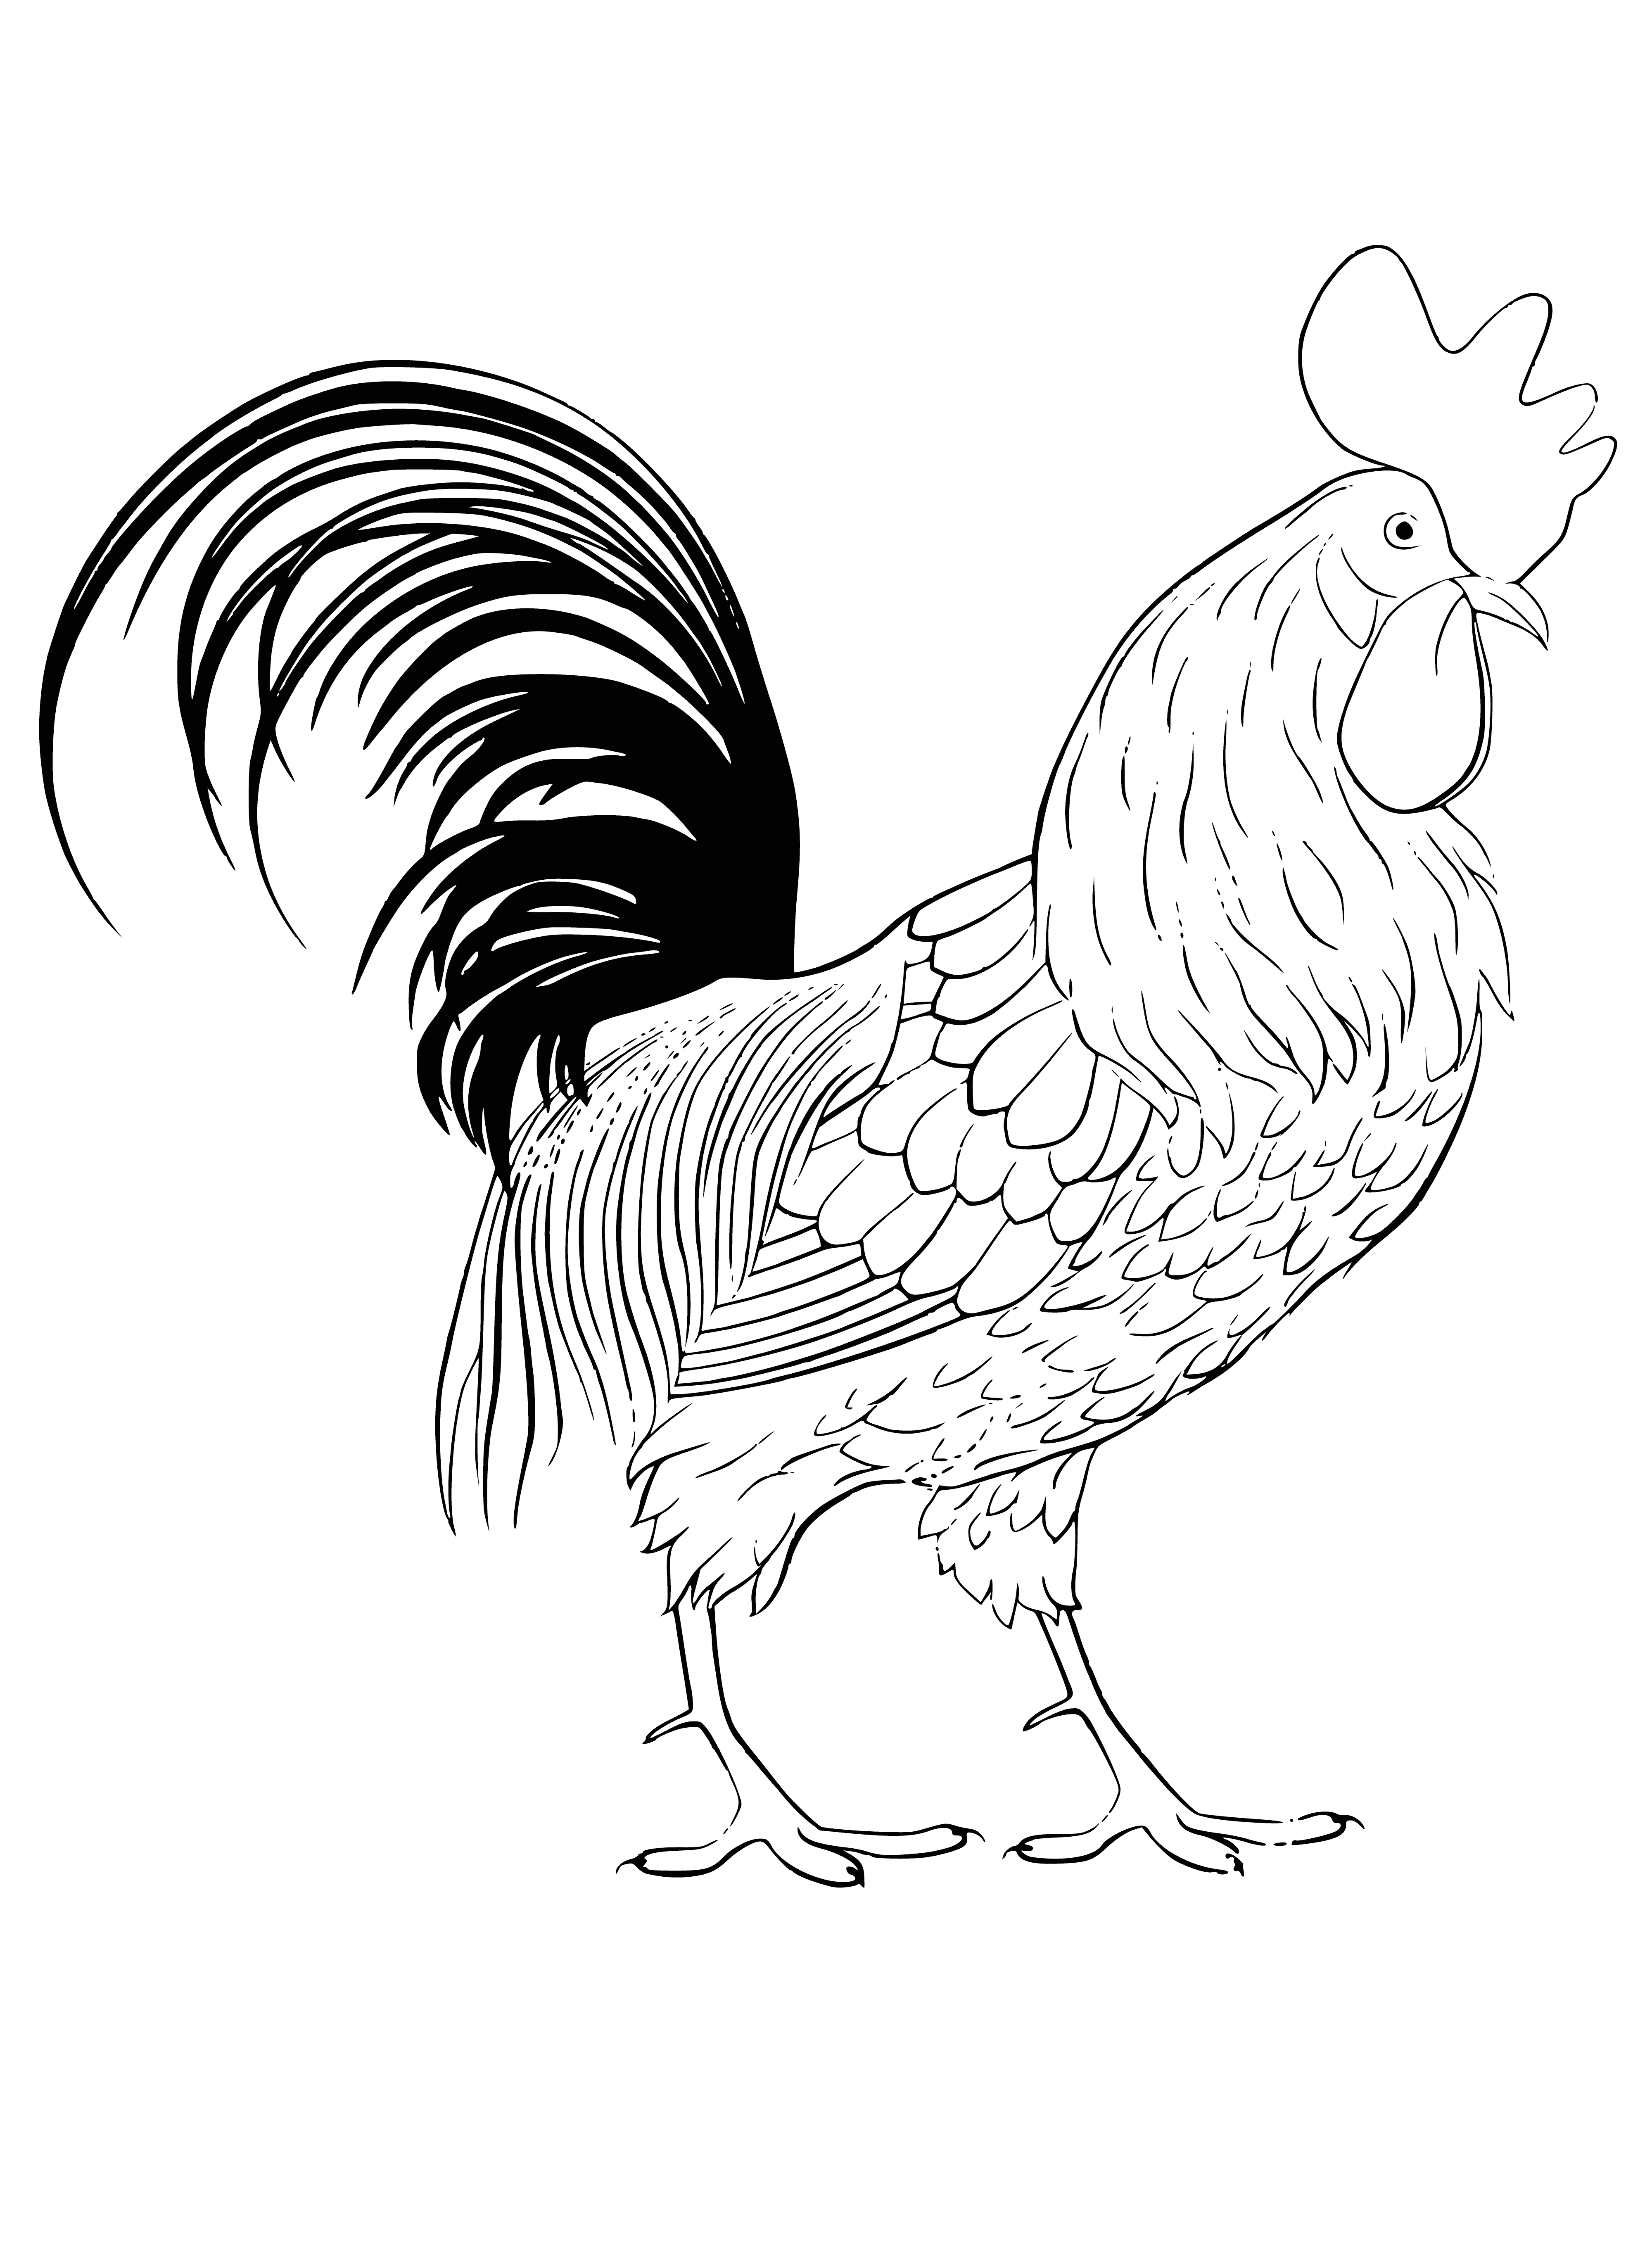 coloring page: Rooster is a beautiful guardian bird w/ a long neck, tail, & red comb head. Very good protector of the flock. #Birds